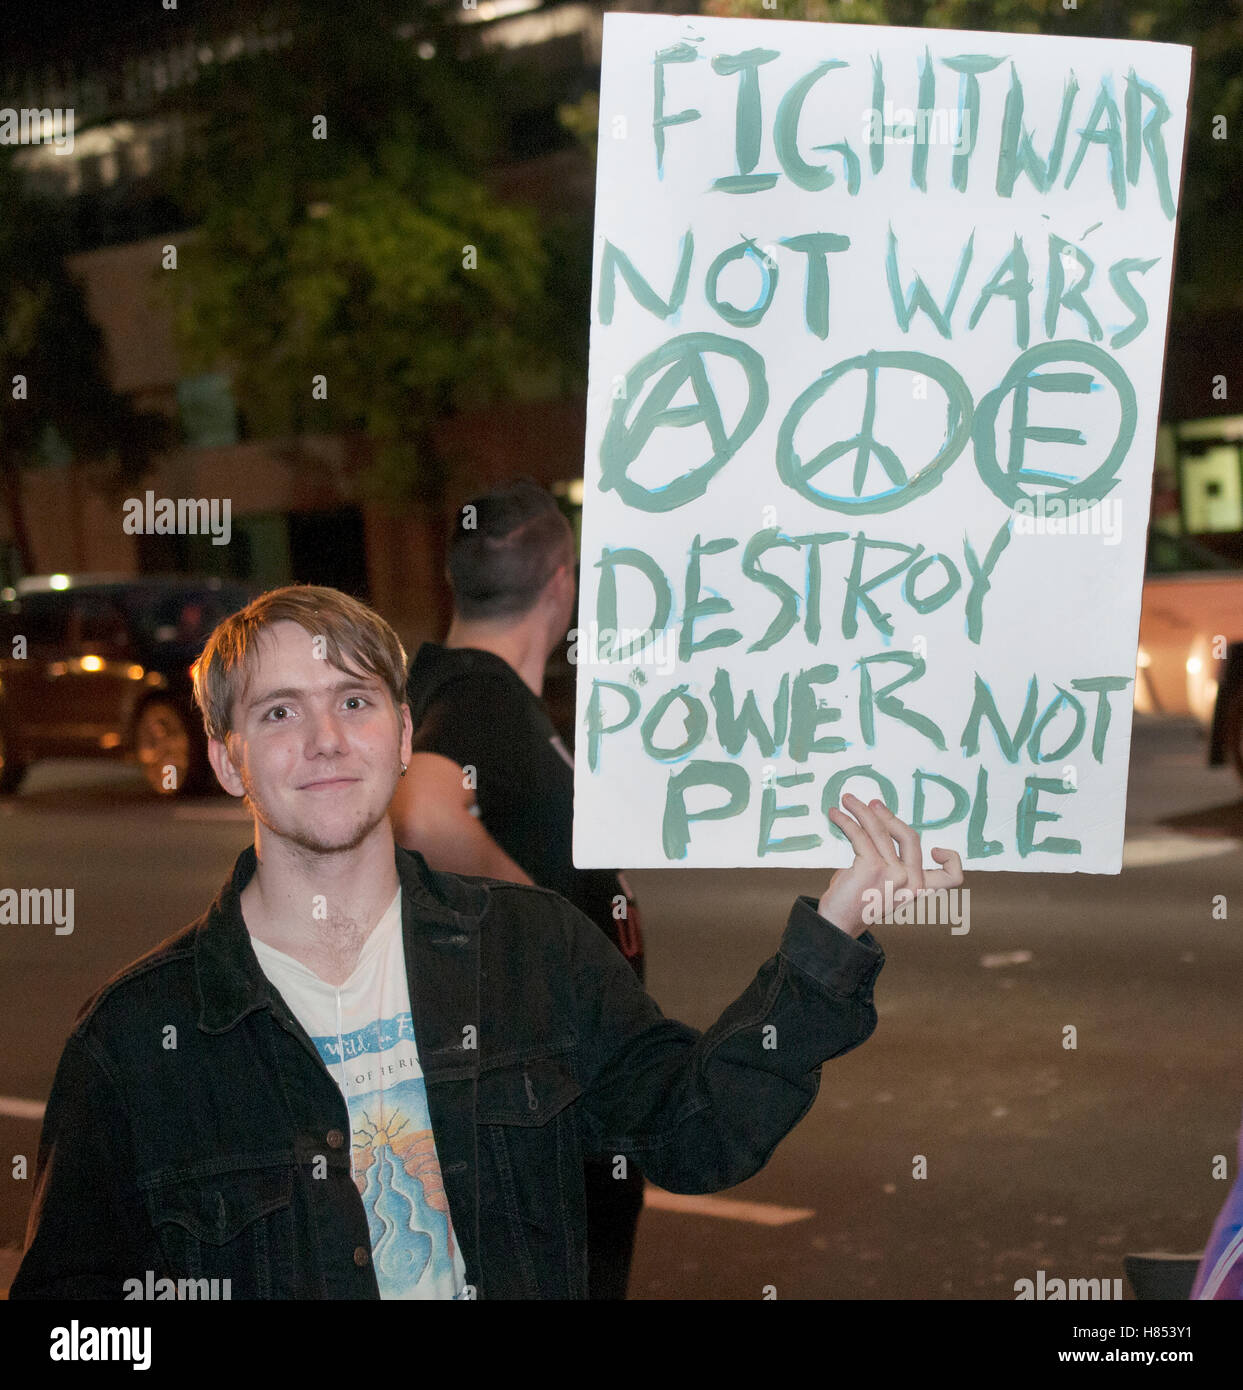 An activist holds a sign reading “fight not wars Destroy power now people” at a protest against the 2016 election results. Credit:  Alex Arnold/Alamy Live News Stock Photo